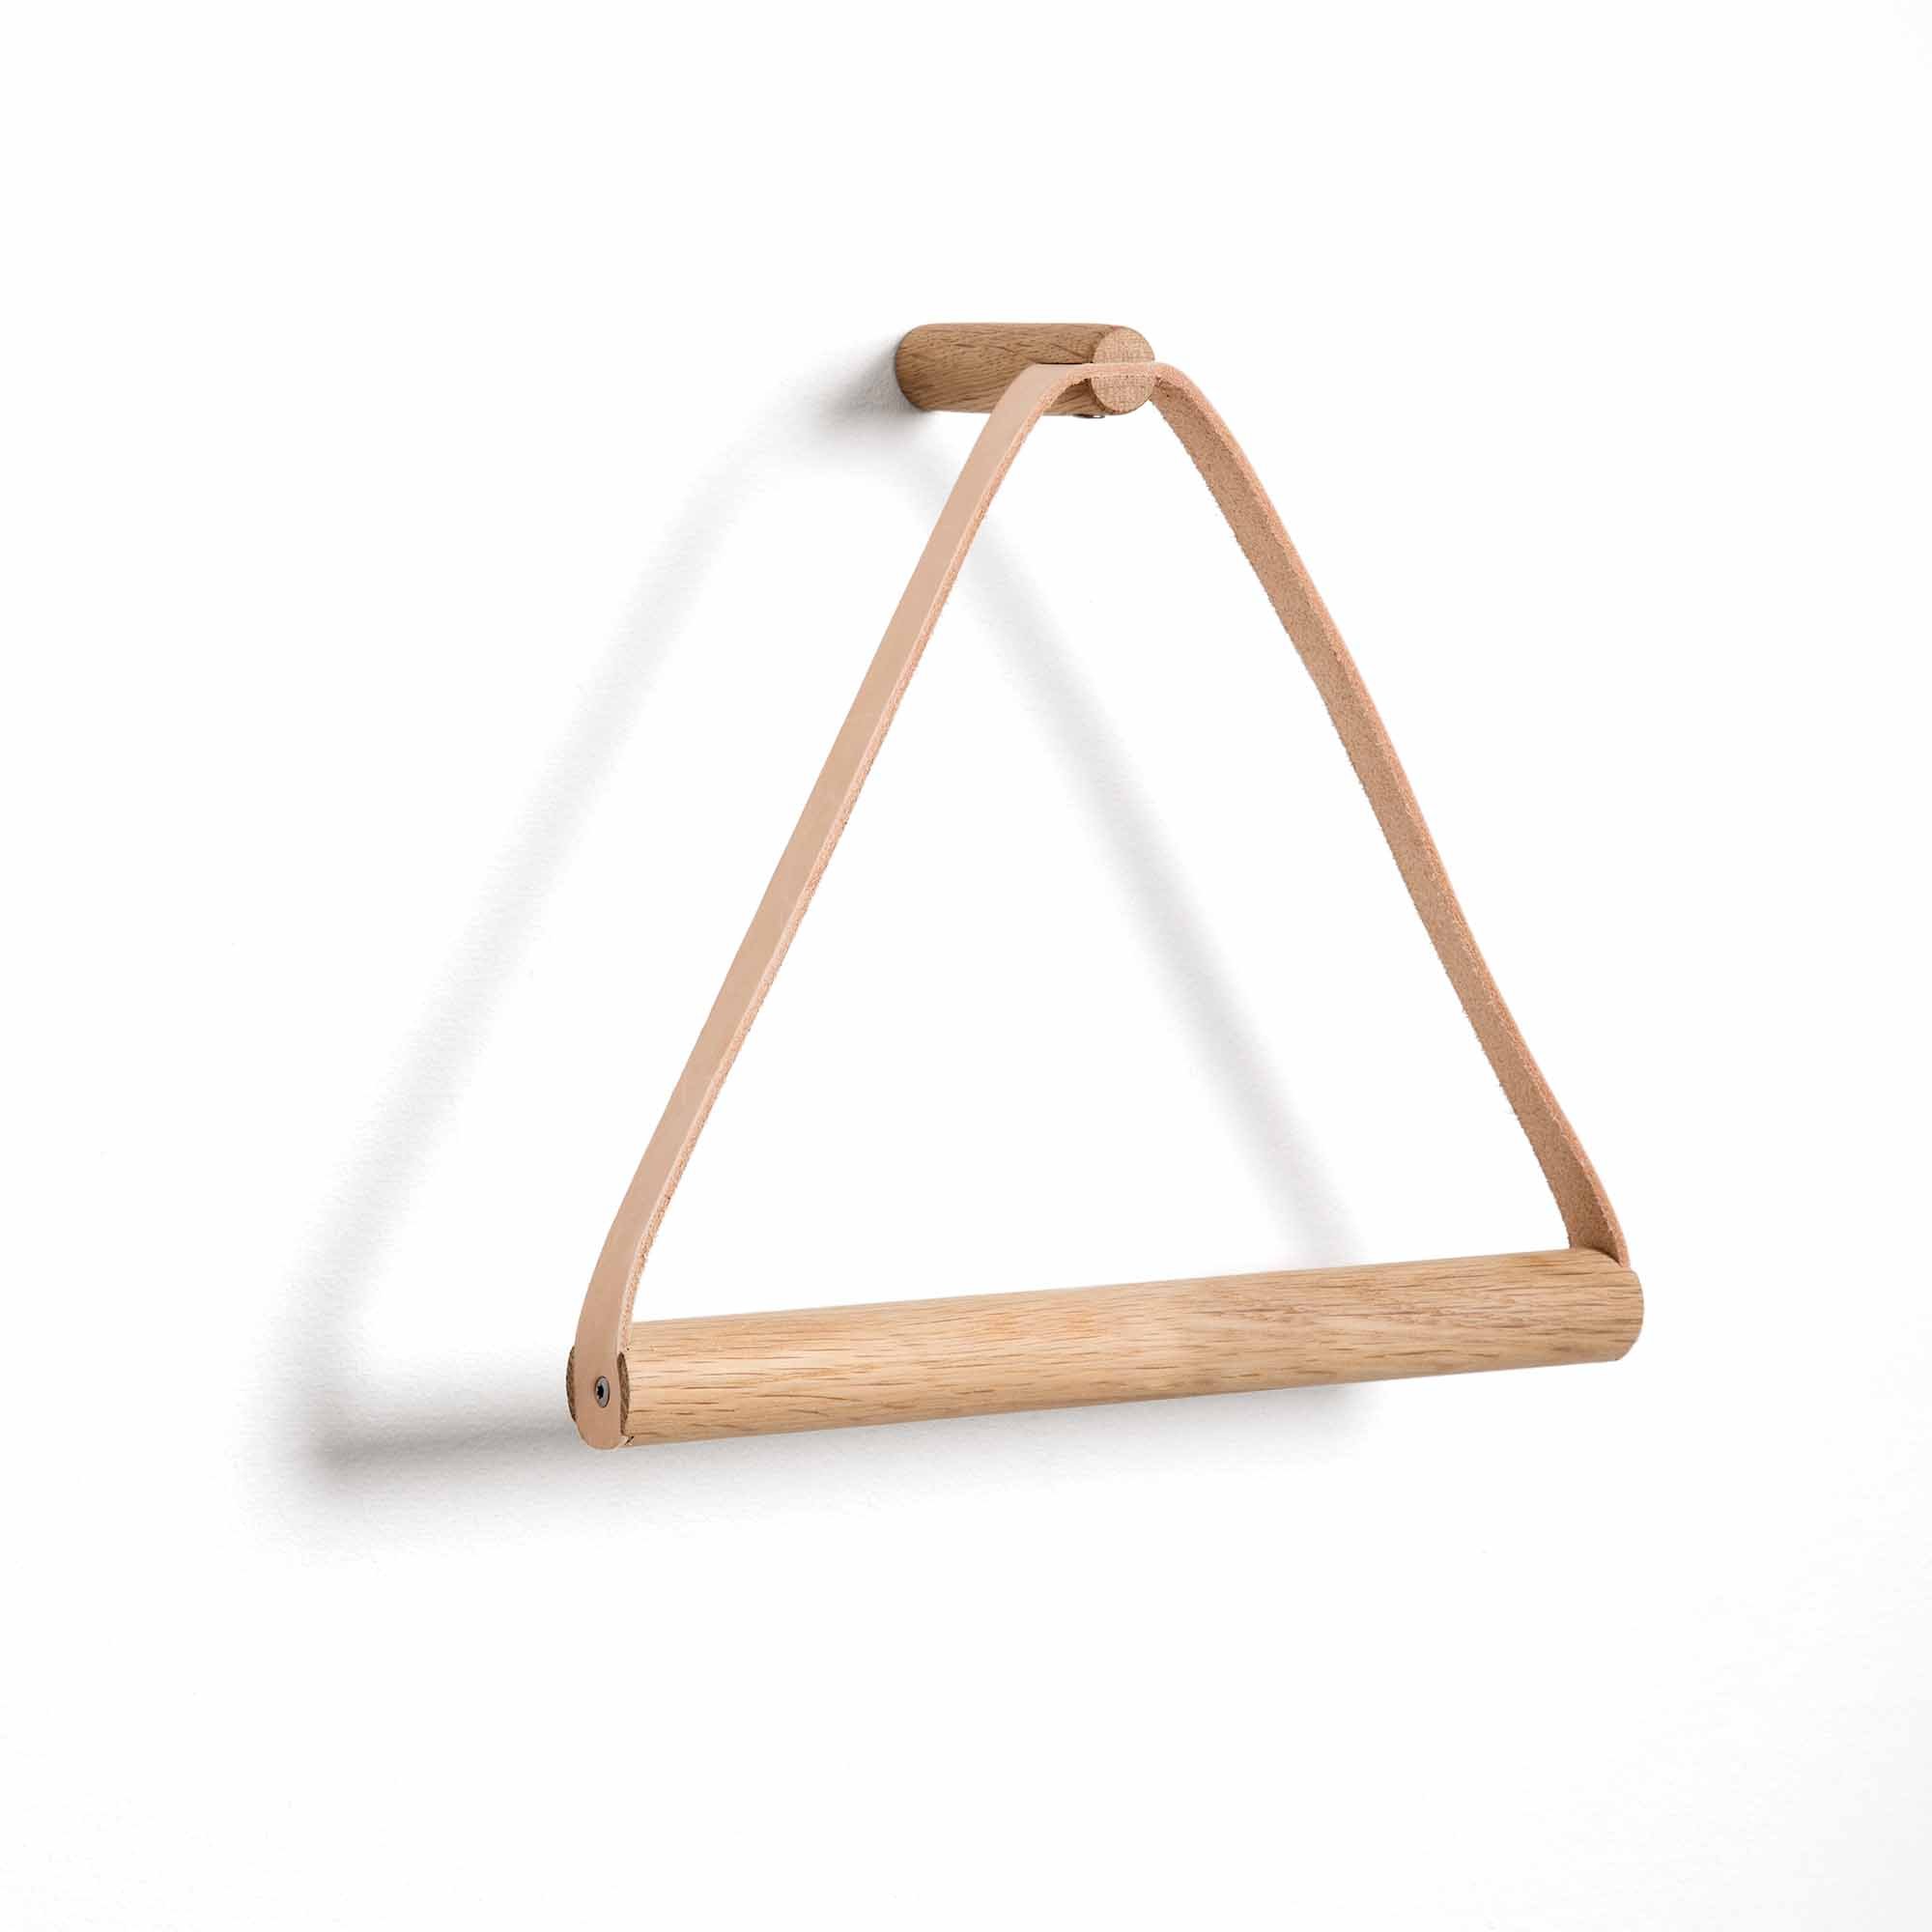 By Wirth - Towel Hanger - Nature (THA 060)